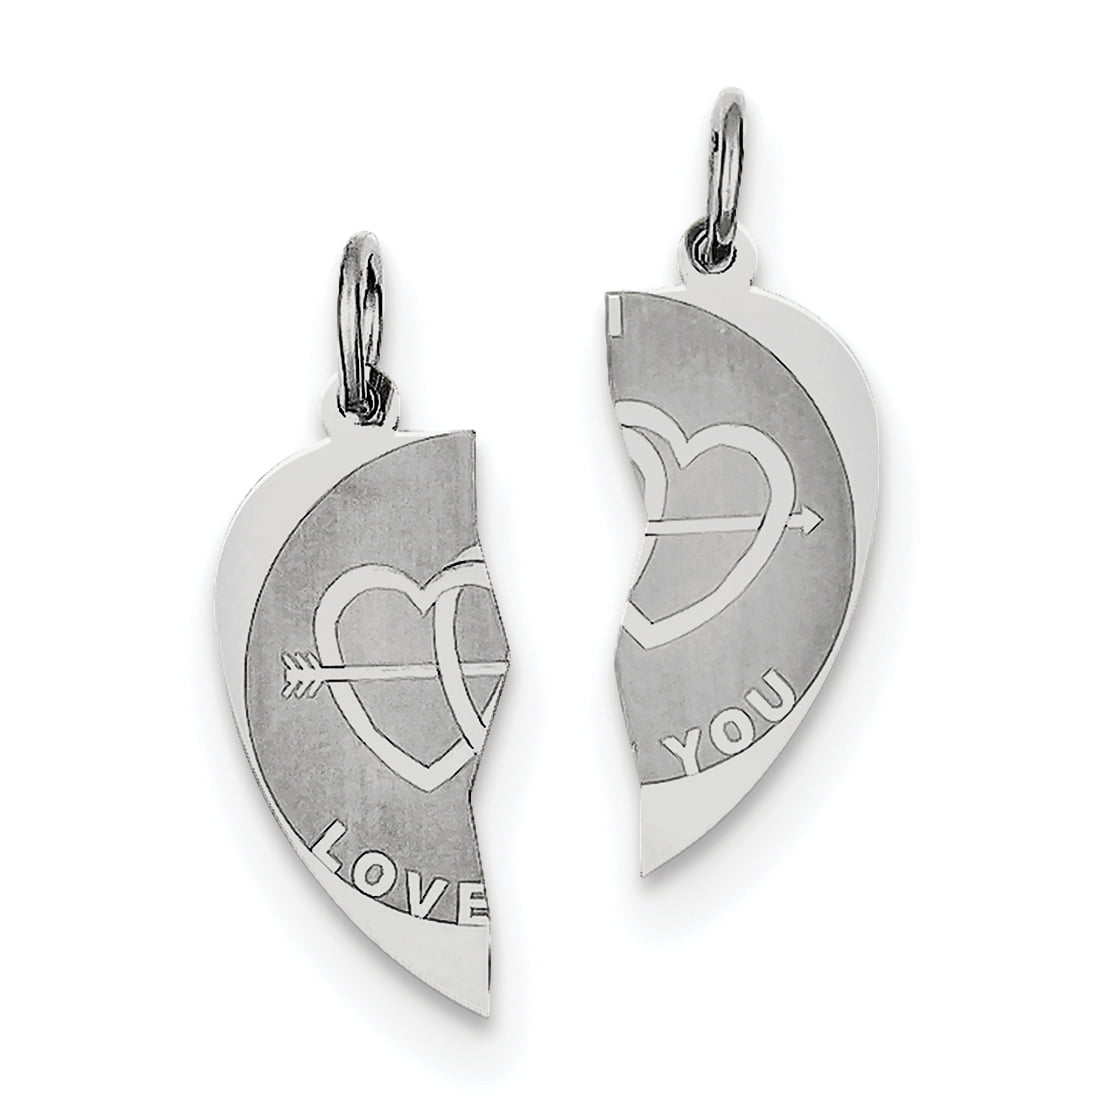 Beautiful Sterling silver 925 sterling Sterling Silver Rhodium-plated Ill Never stop loving you Charm 